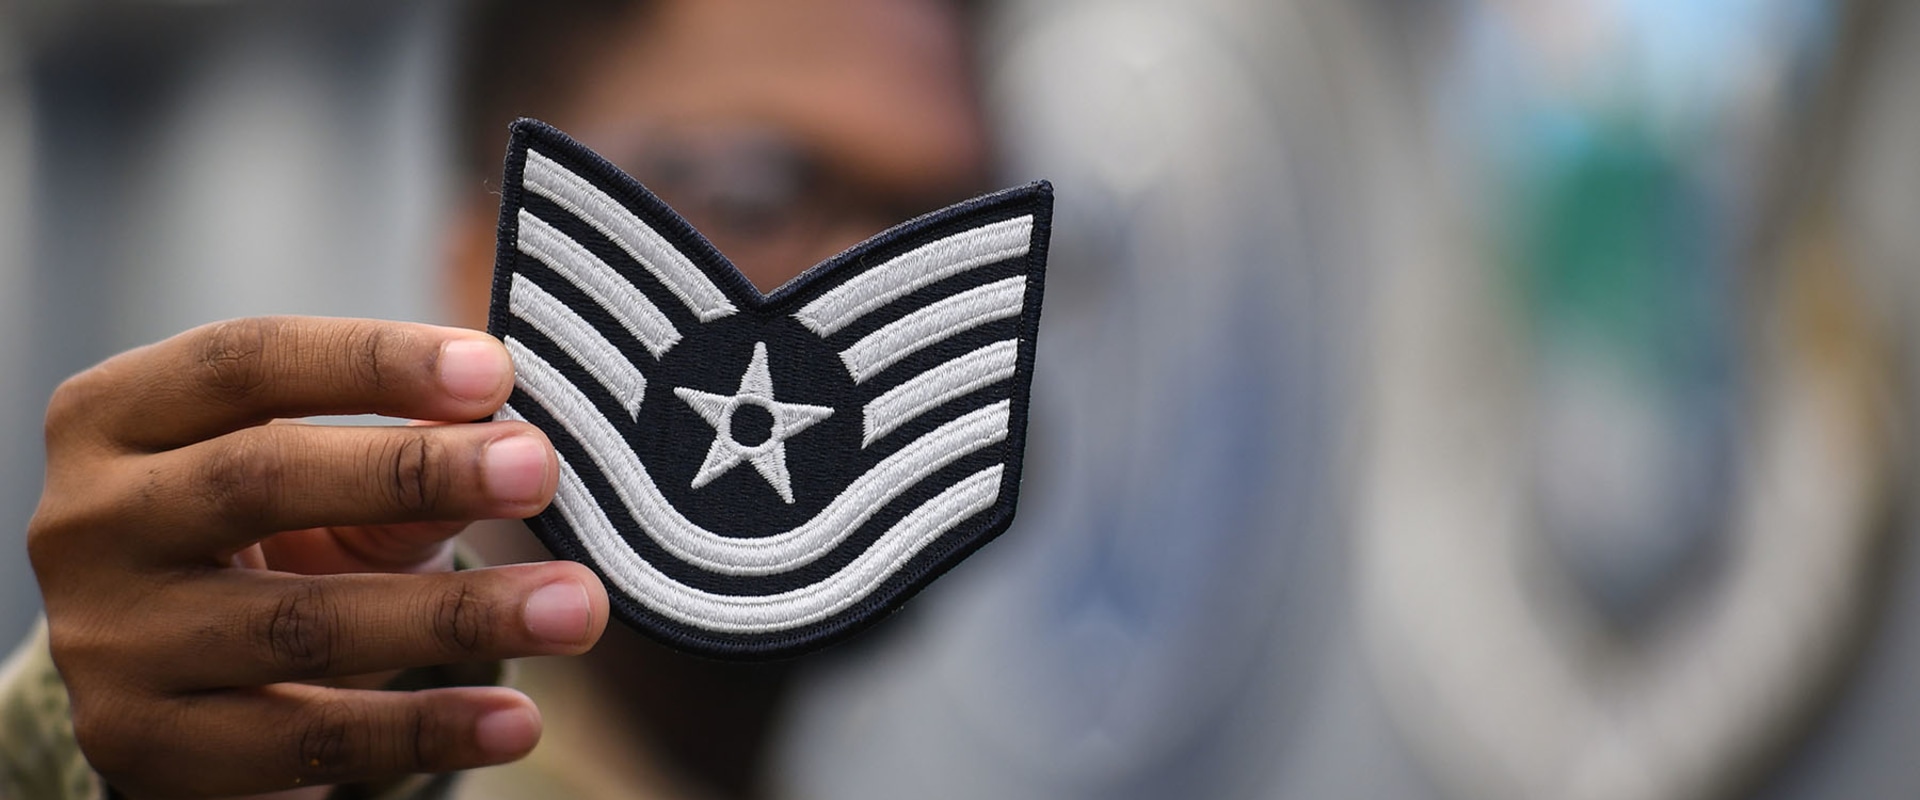 A Comprehensive Guide to the Military Ranks of the Air Force